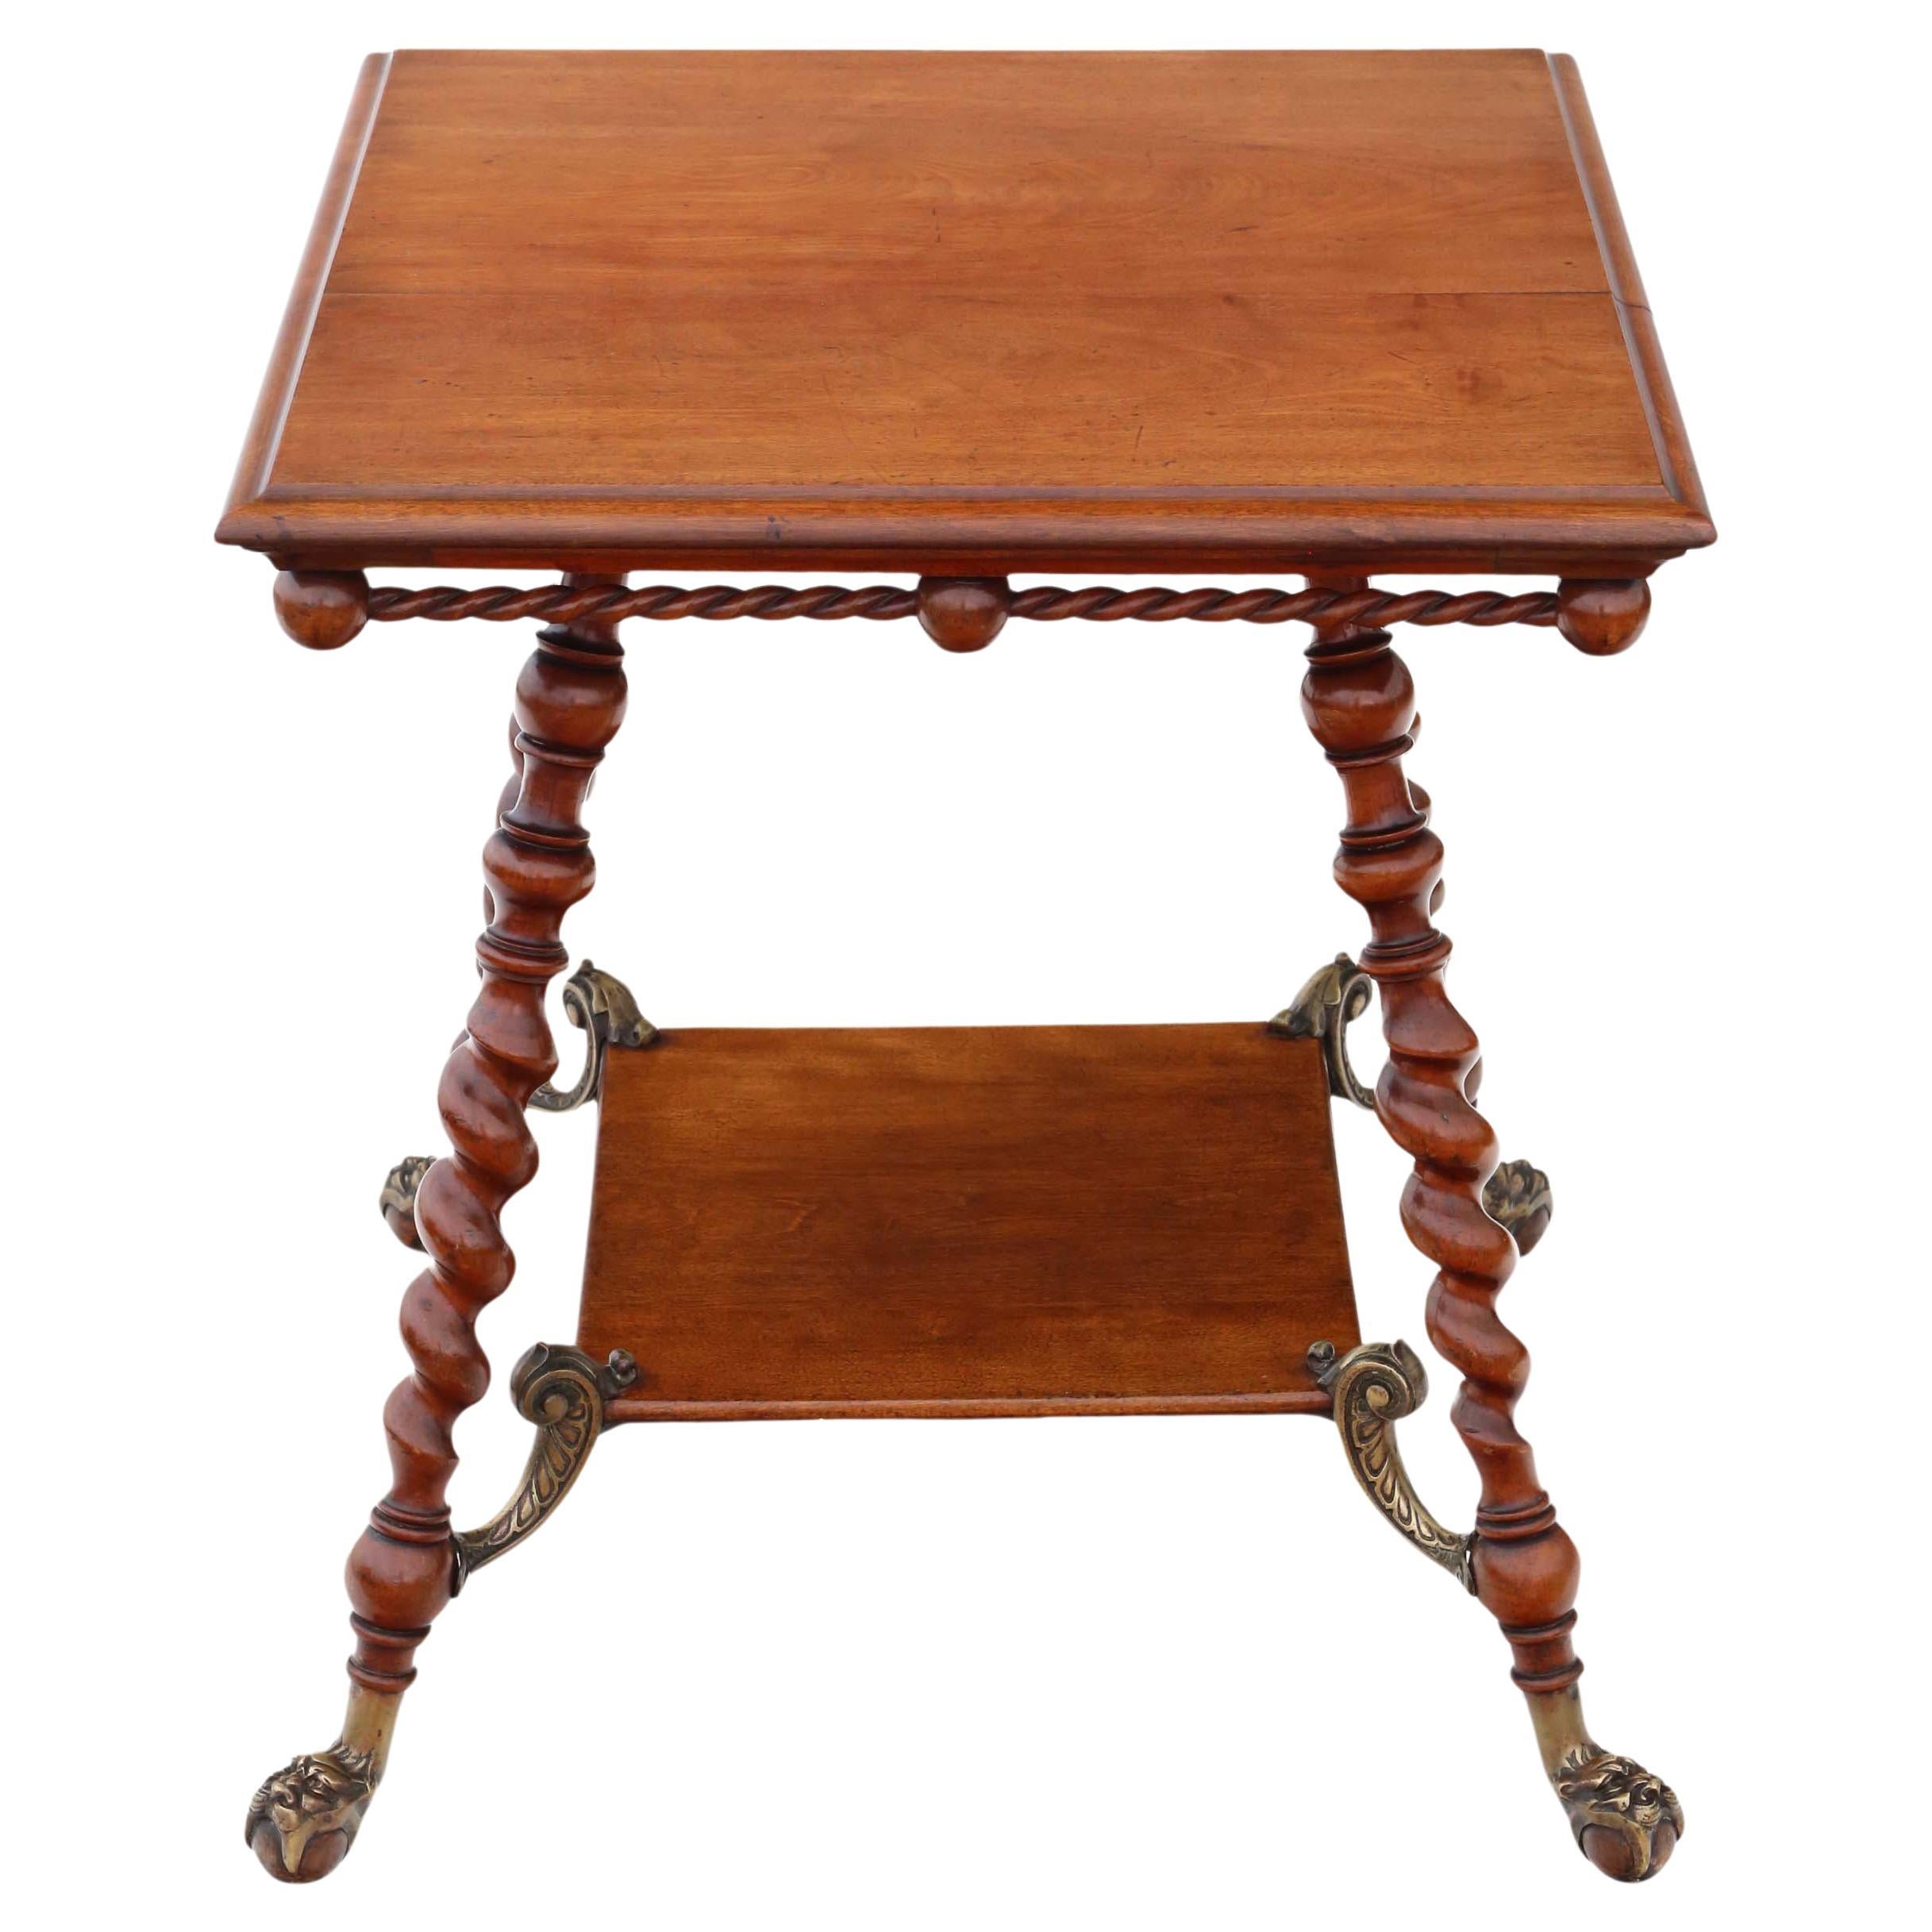 Fine Quality Victorian Red Walnut and Brass Centre Table from circa 1880-1900, A